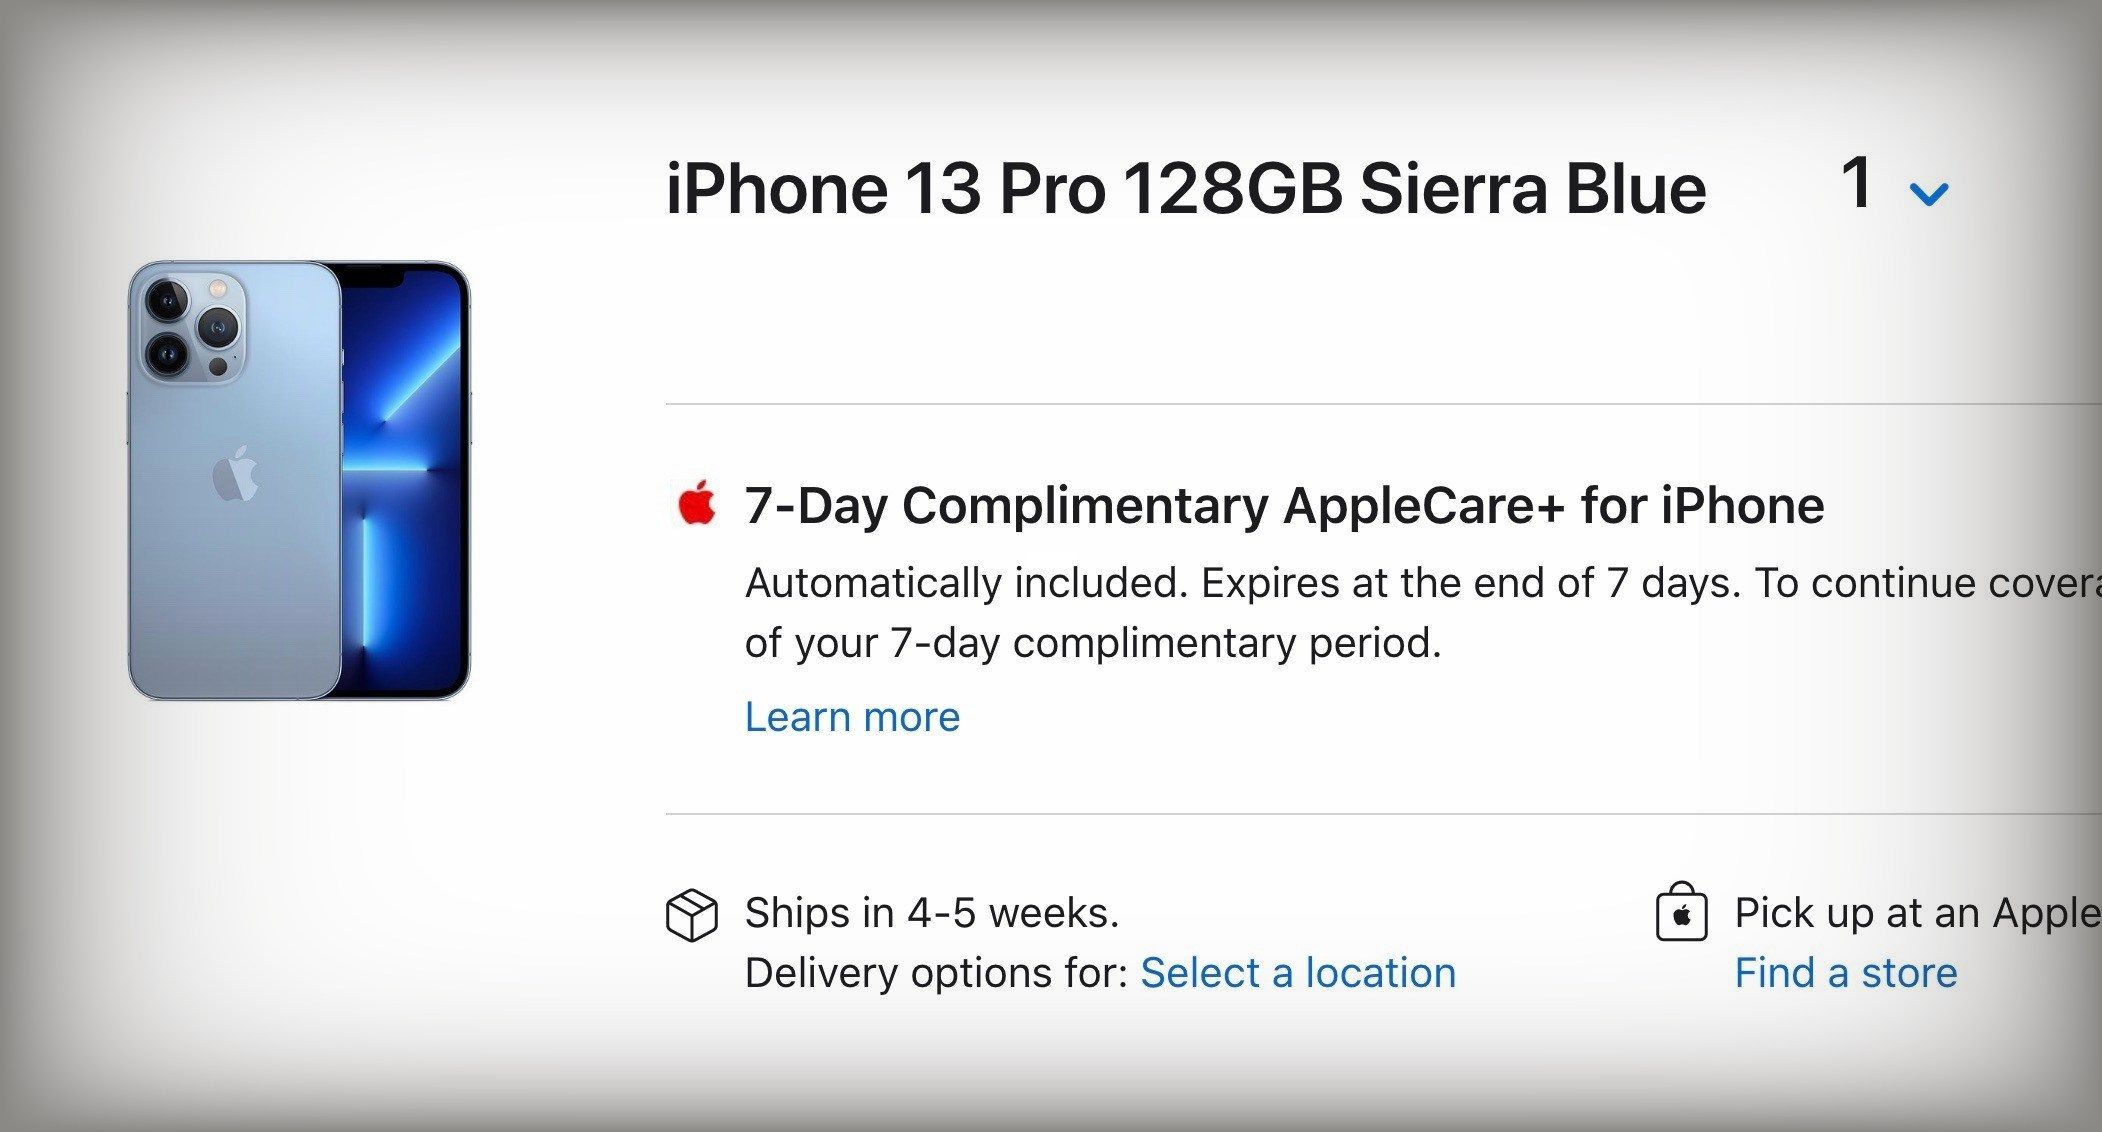 Apple Products Now Include 7-Day Complimentary AppleCare+ in Australia